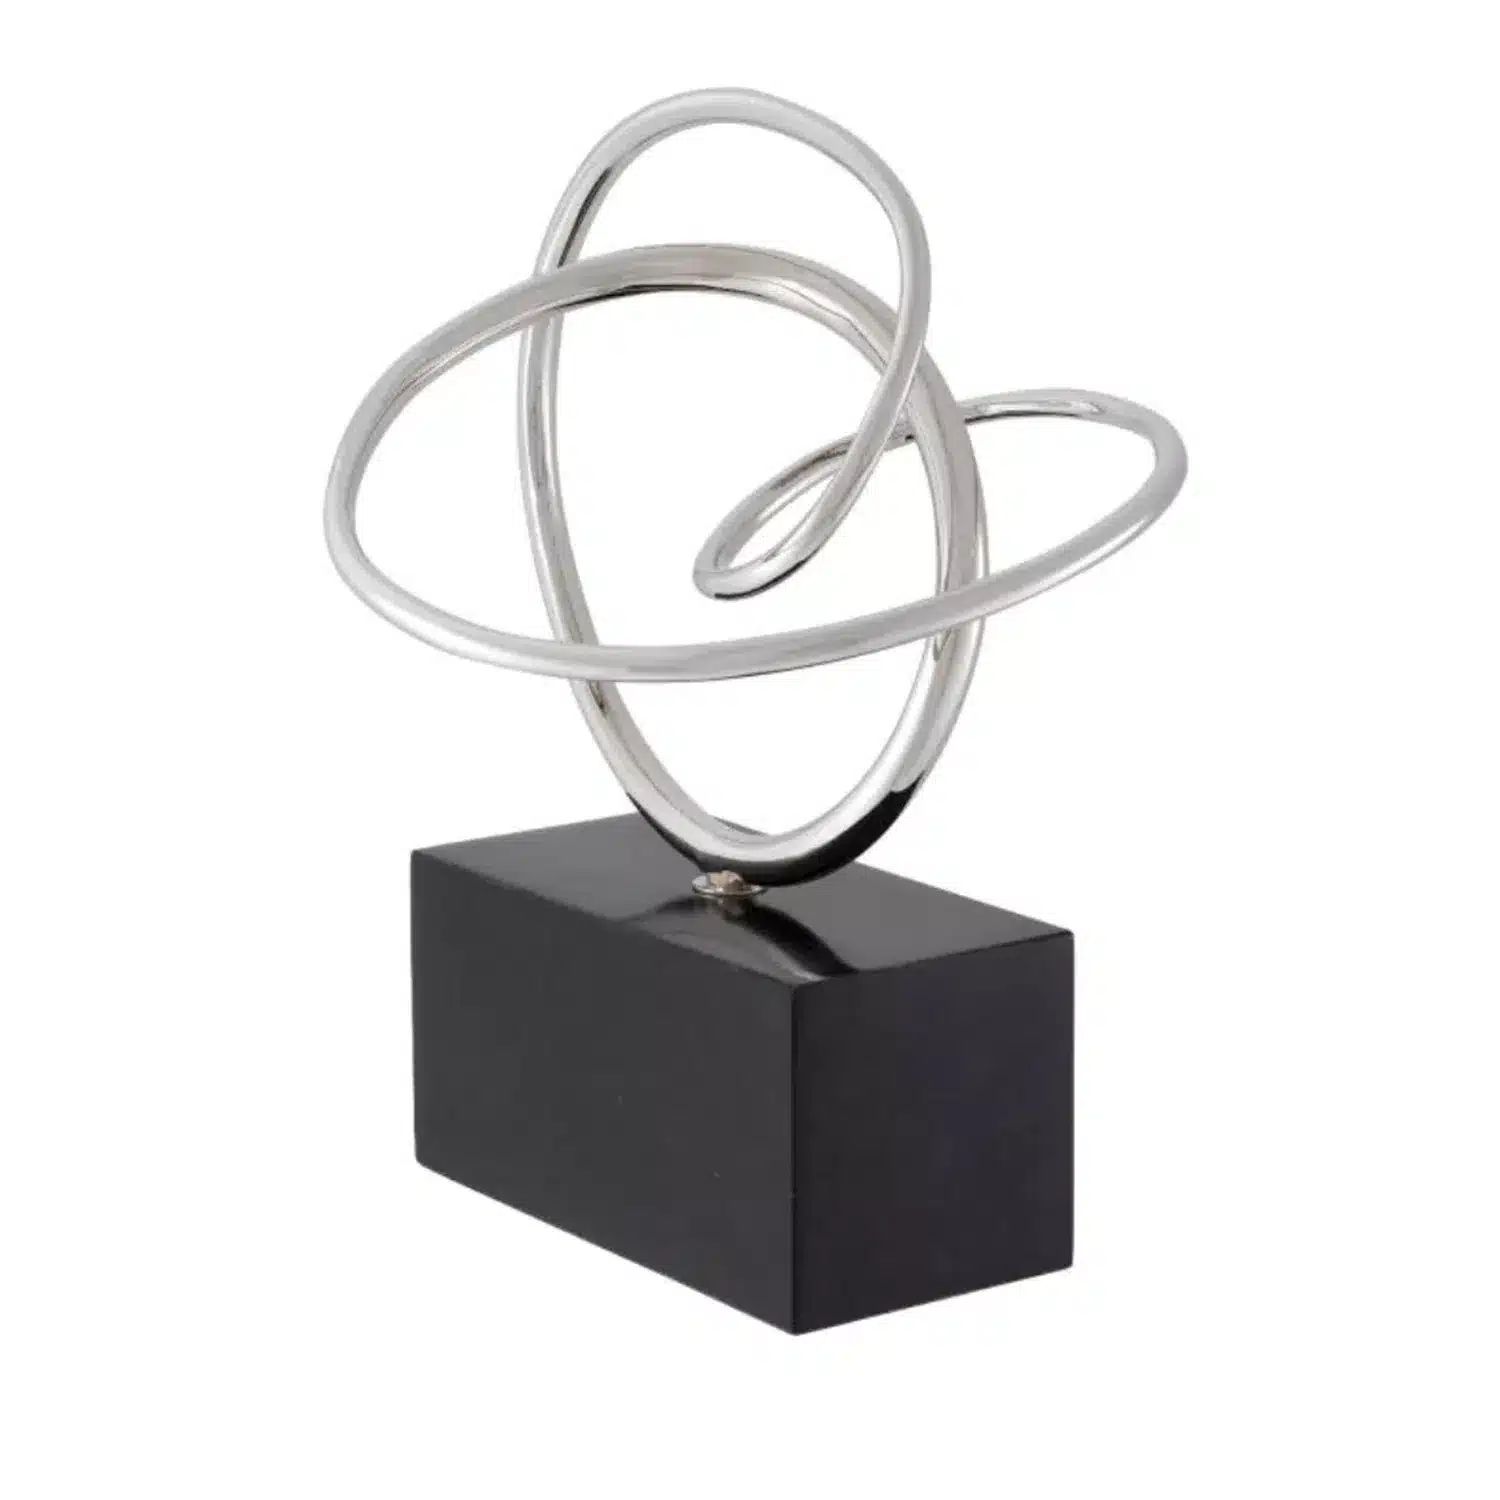 A stunning handmade flow sculpture, the perfect luxury home decor addition to any space